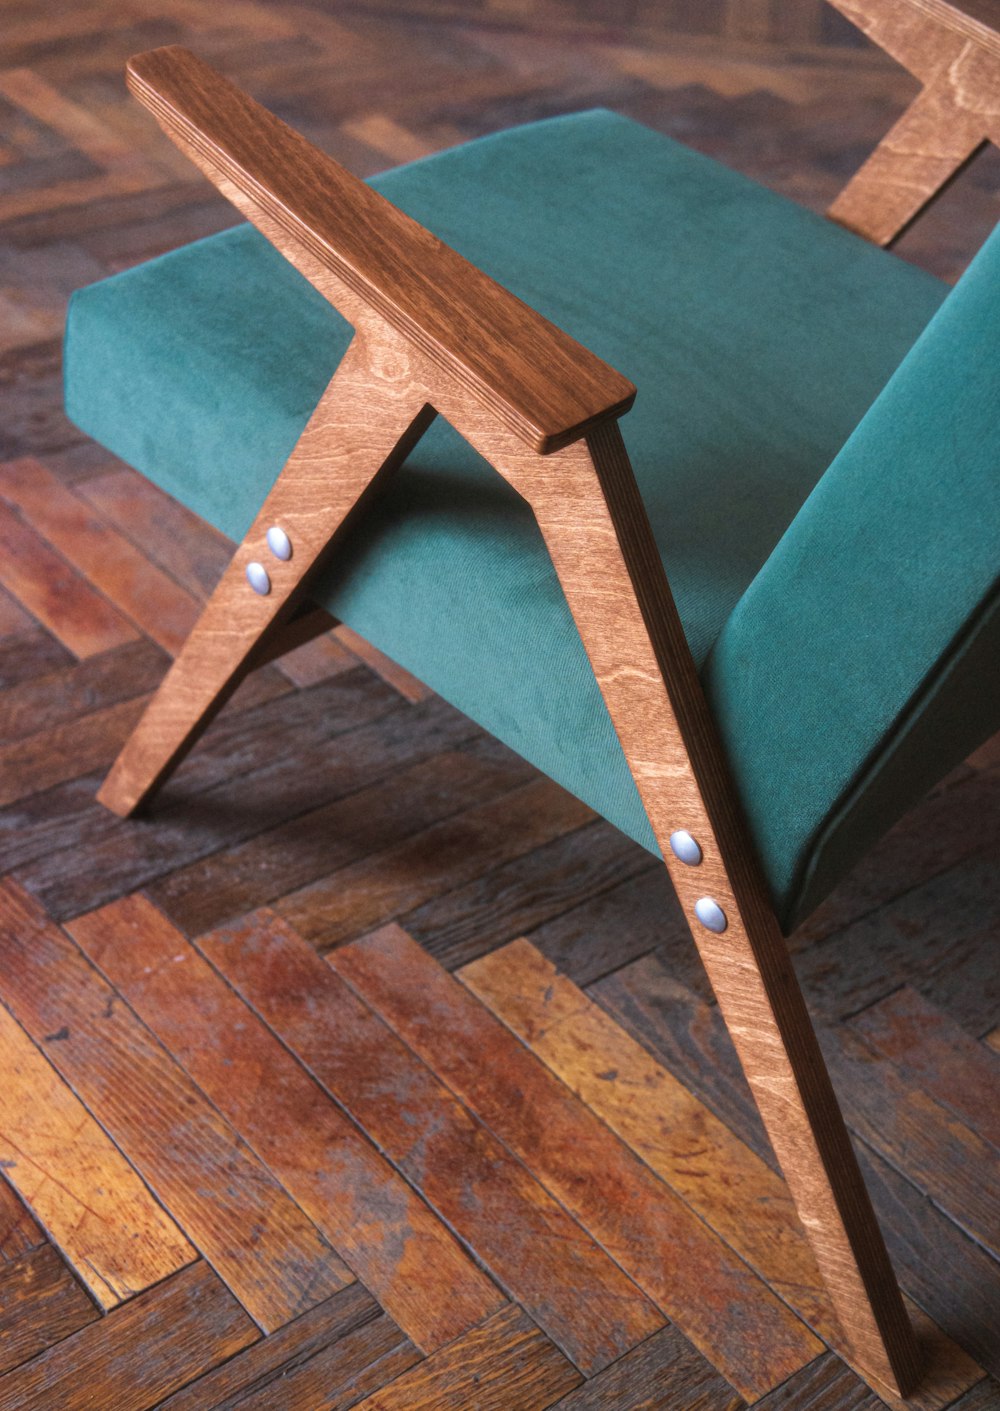 a green chair sitting on top of a wooden floor